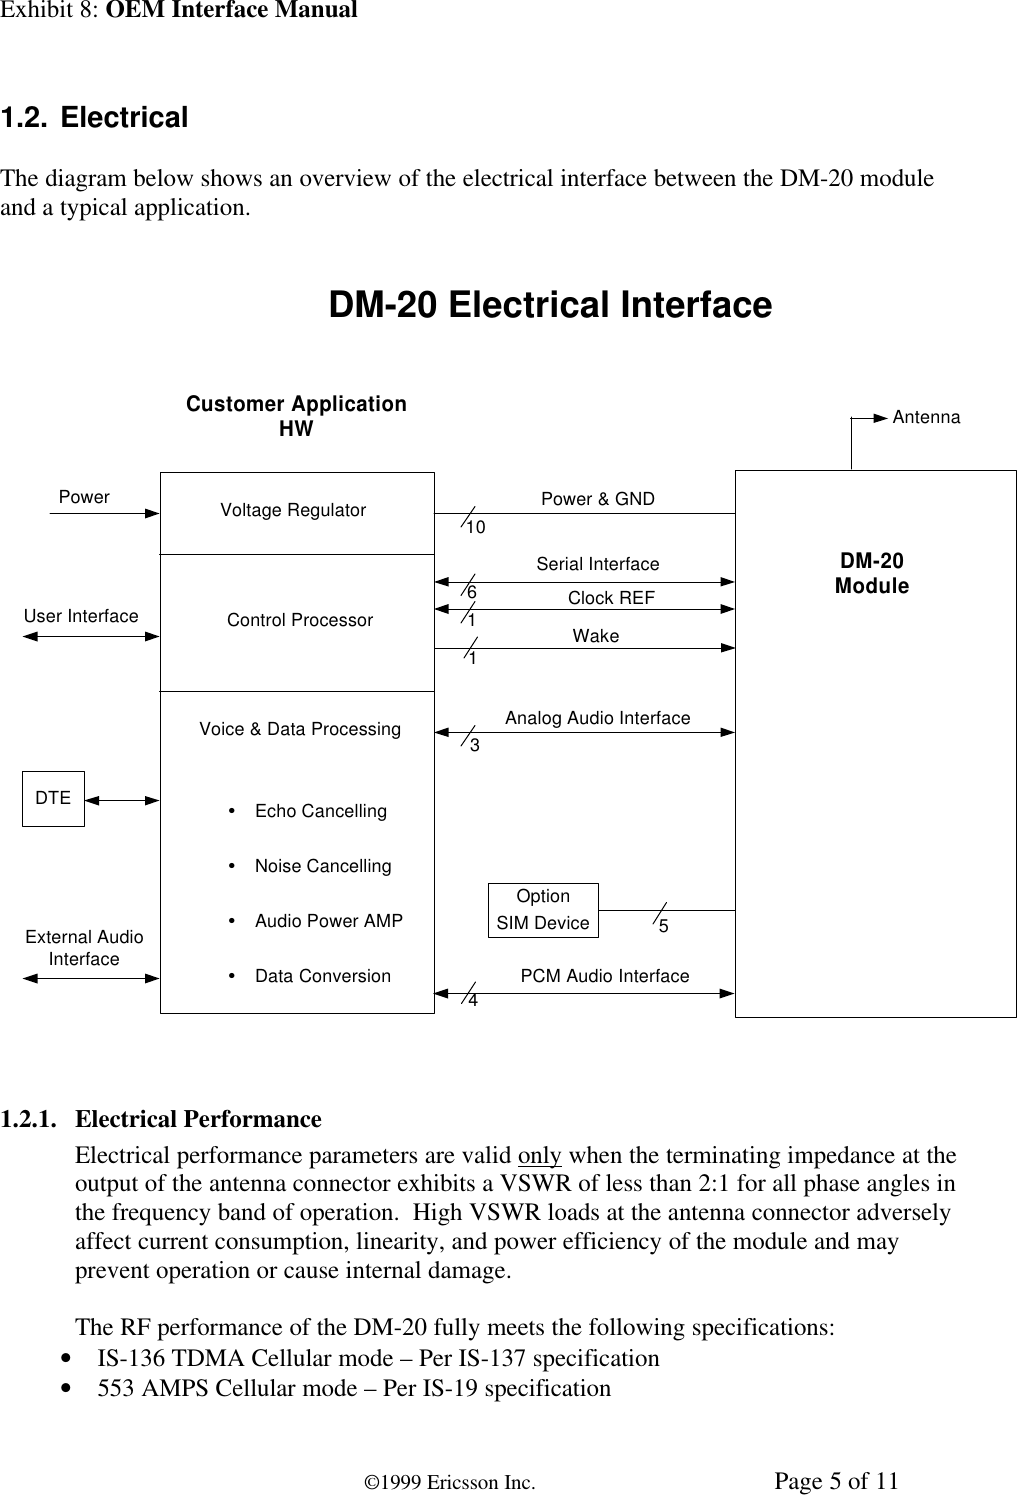 Exhibit 8: OEM Interface Manual©1999 Ericsson Inc. Page 5 of 111.2. ElectricalThe diagram below shows an overview of the electrical interface between the DM-20 moduleand a typical application.DM-20 Electrical InterfaceCustomer ApplicationHWVoltage RegulatorControl ProcessorVoice &amp; Data ProcessingŸEcho CancellingŸNoise CancellingŸAudio Power AMPŸData ConversionDTEPowerExternal AudioInterfaceAntennaUser Interface61Power &amp; GNDSerial InterfaceWakeAnalog Audio Interface101354Clock REFOptionSIM DeviceDM-20ModulePCM Audio Interface1.2.1. Electrical PerformanceElectrical performance parameters are valid only when the terminating impedance at theoutput of the antenna connector exhibits a VSWR of less than 2:1 for all phase angles inthe frequency band of operation.  High VSWR loads at the antenna connector adverselyaffect current consumption, linearity, and power efficiency of the module and mayprevent operation or cause internal damage.The RF performance of the DM-20 fully meets the following specifications:• IS-136 TDMA Cellular mode – Per IS-137 specification• 553 AMPS Cellular mode – Per IS-19 specification